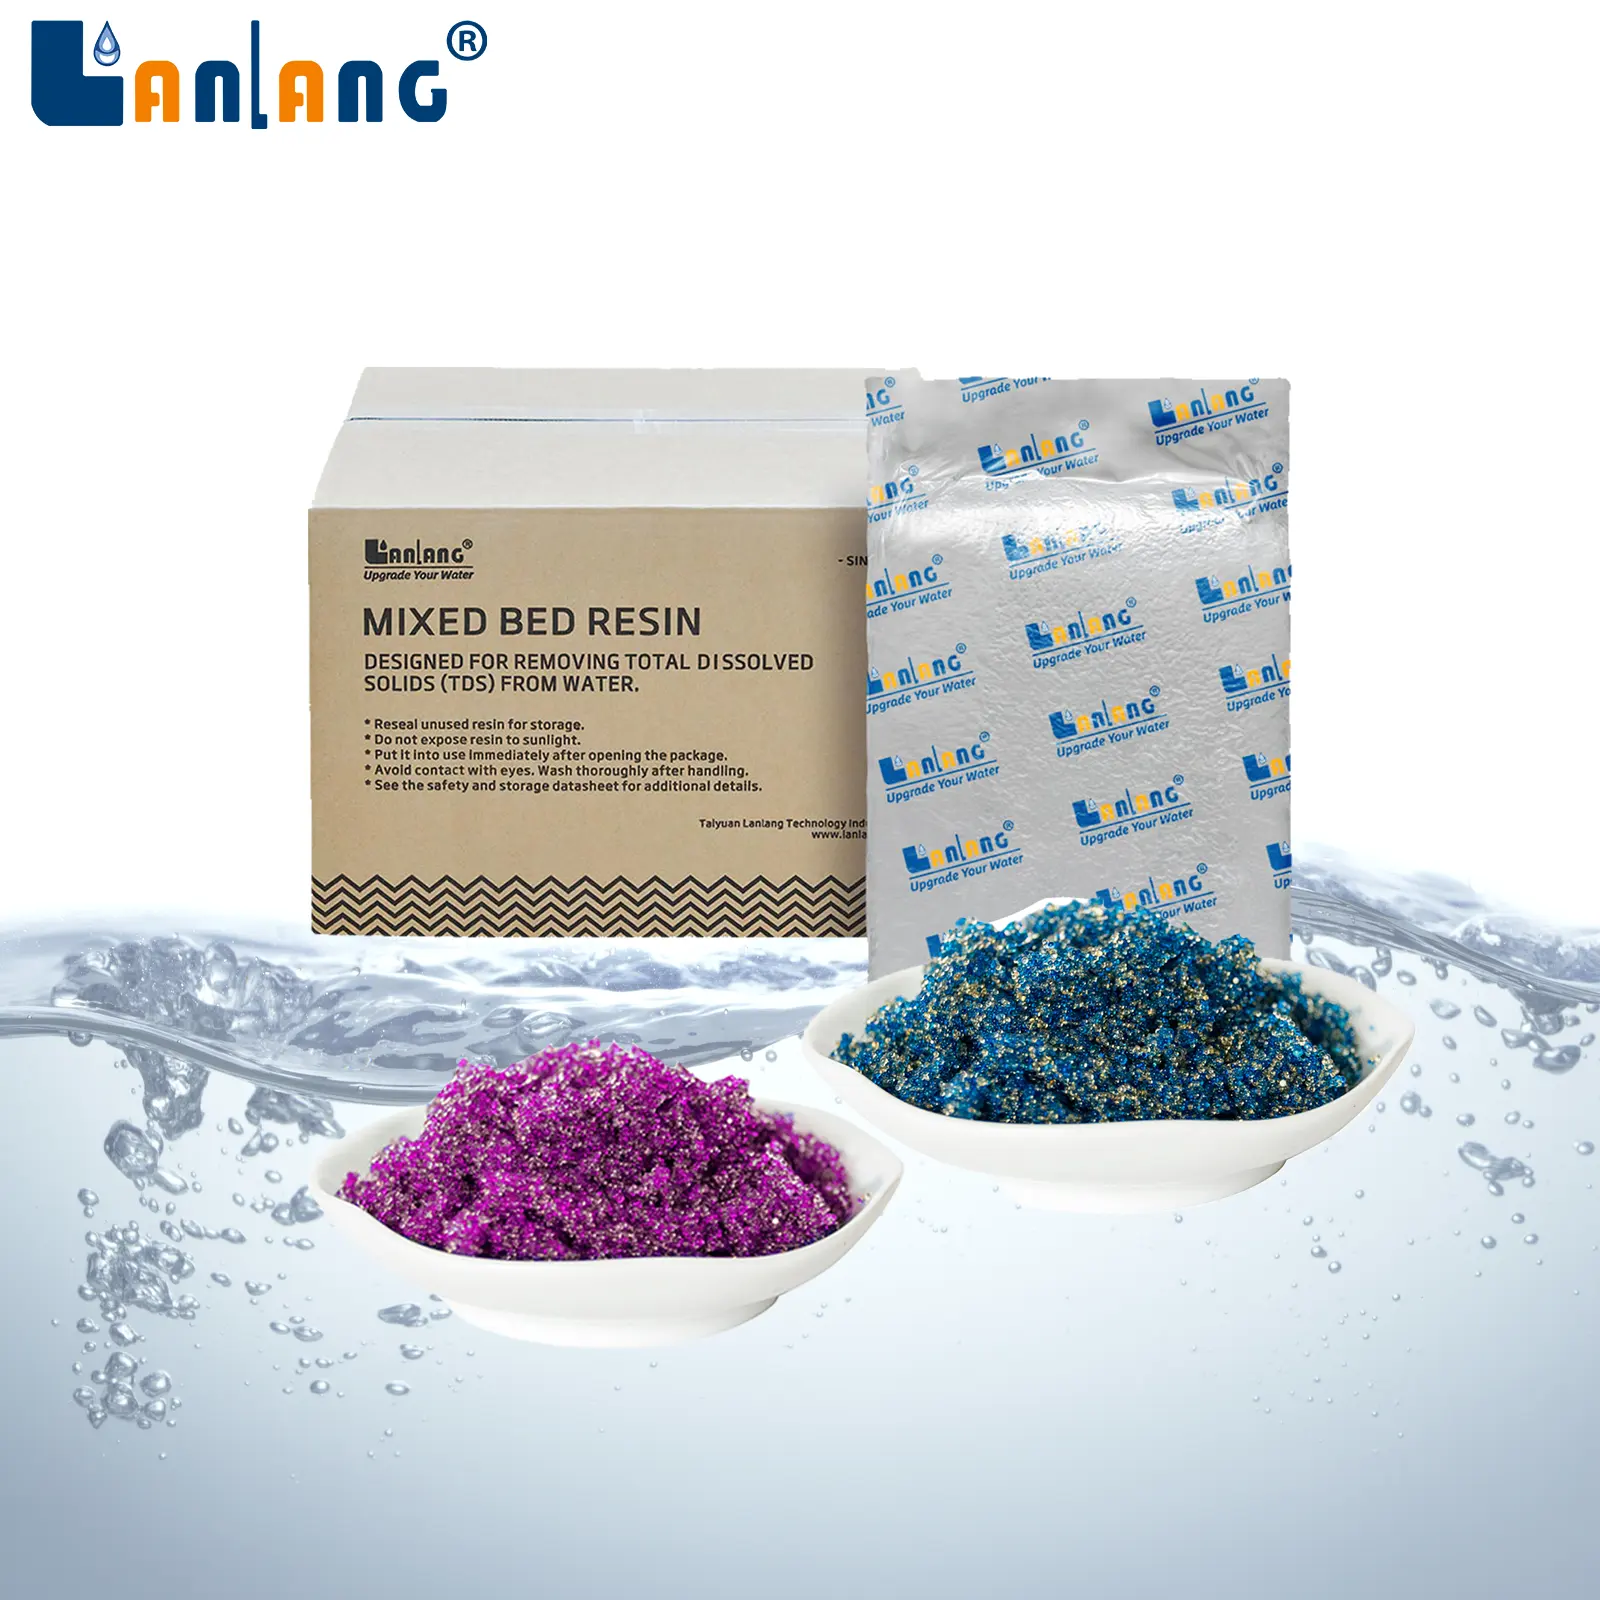 Water purify softener for window cleaning car washing dentist beauty industry DI deionized mixed bed resin